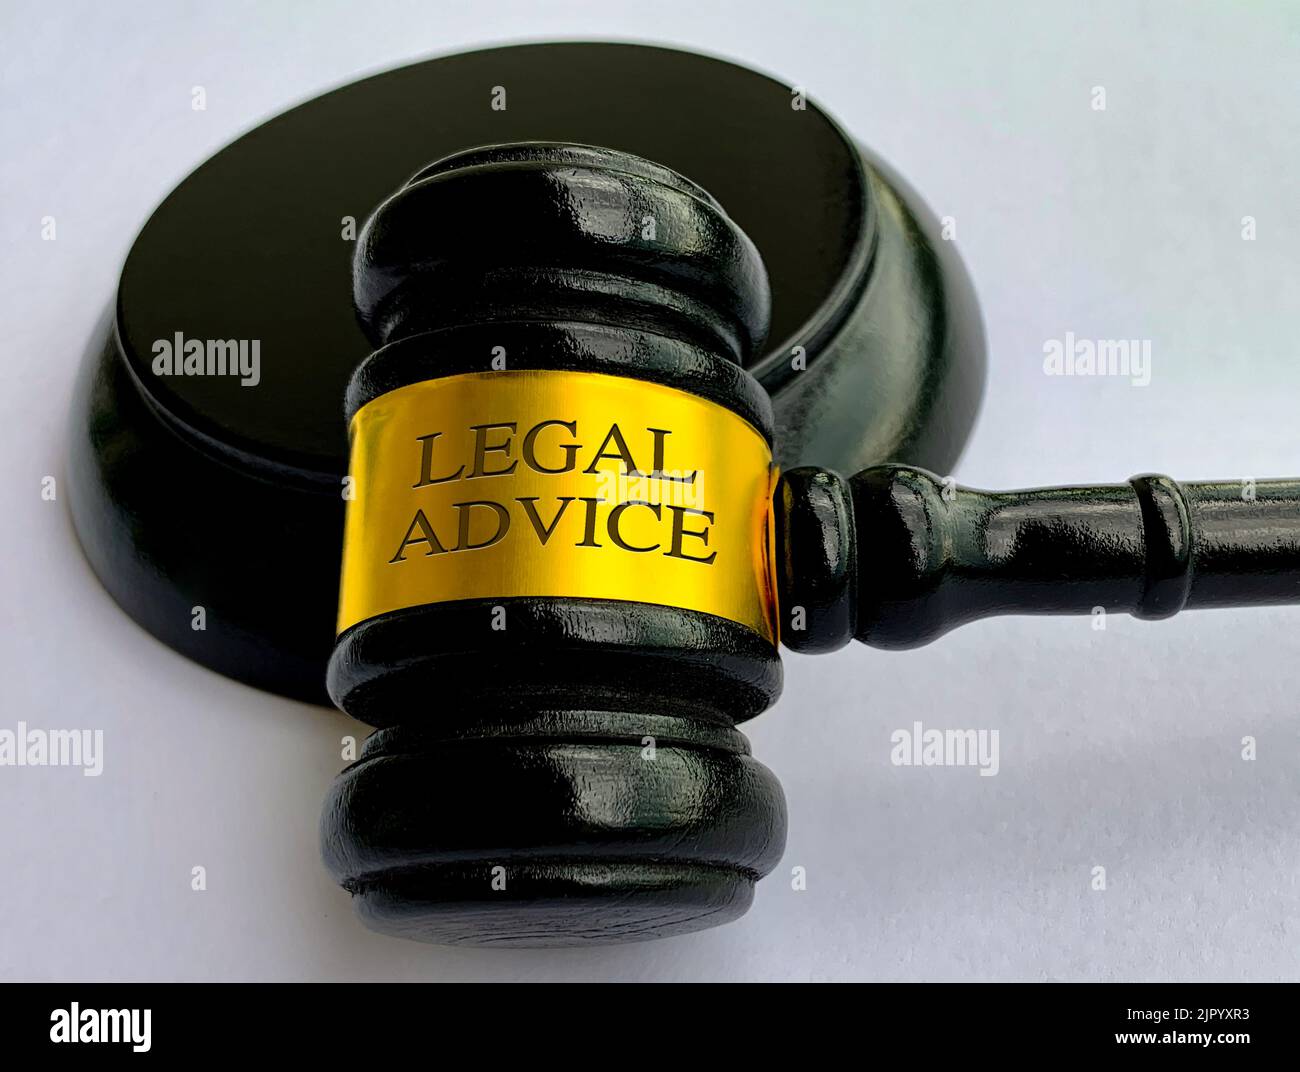 Legal advice text engraved on lawyer gavel on white cover background. Legal and law concept. Stock Photo